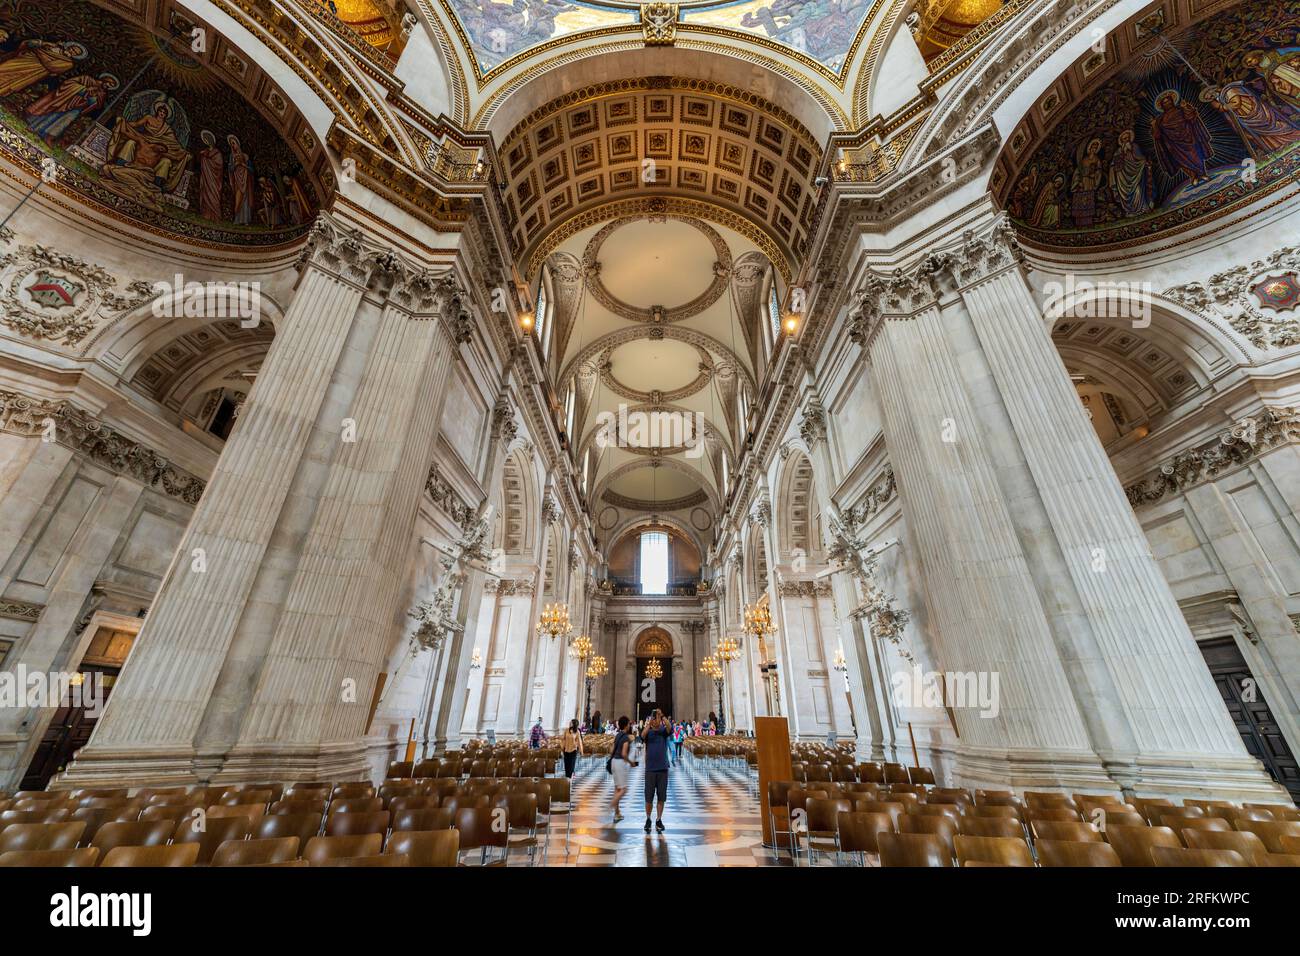 London, England, UK - July 25, 2022. St Paul's Cathedral interior of the nave, facing the entrance. St Paul's is a historic church, national treasure. Stock Photo